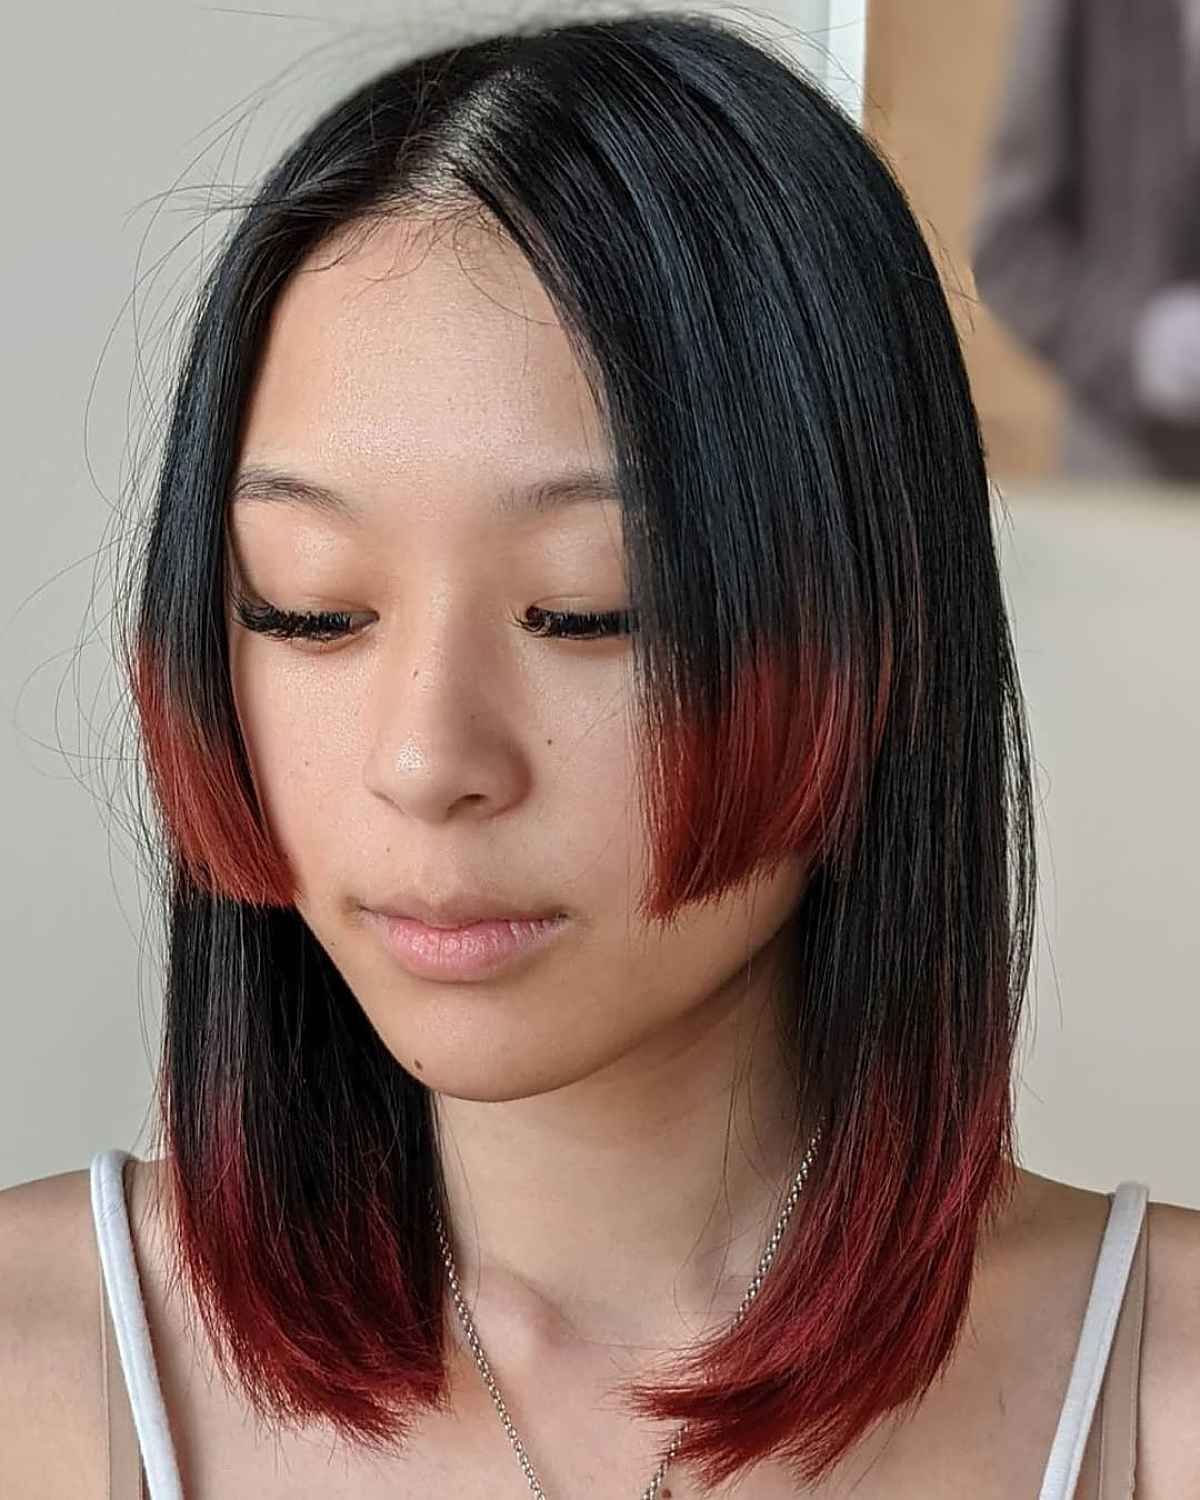 26 Hottest Ways to Get The Hime Haircut Trend